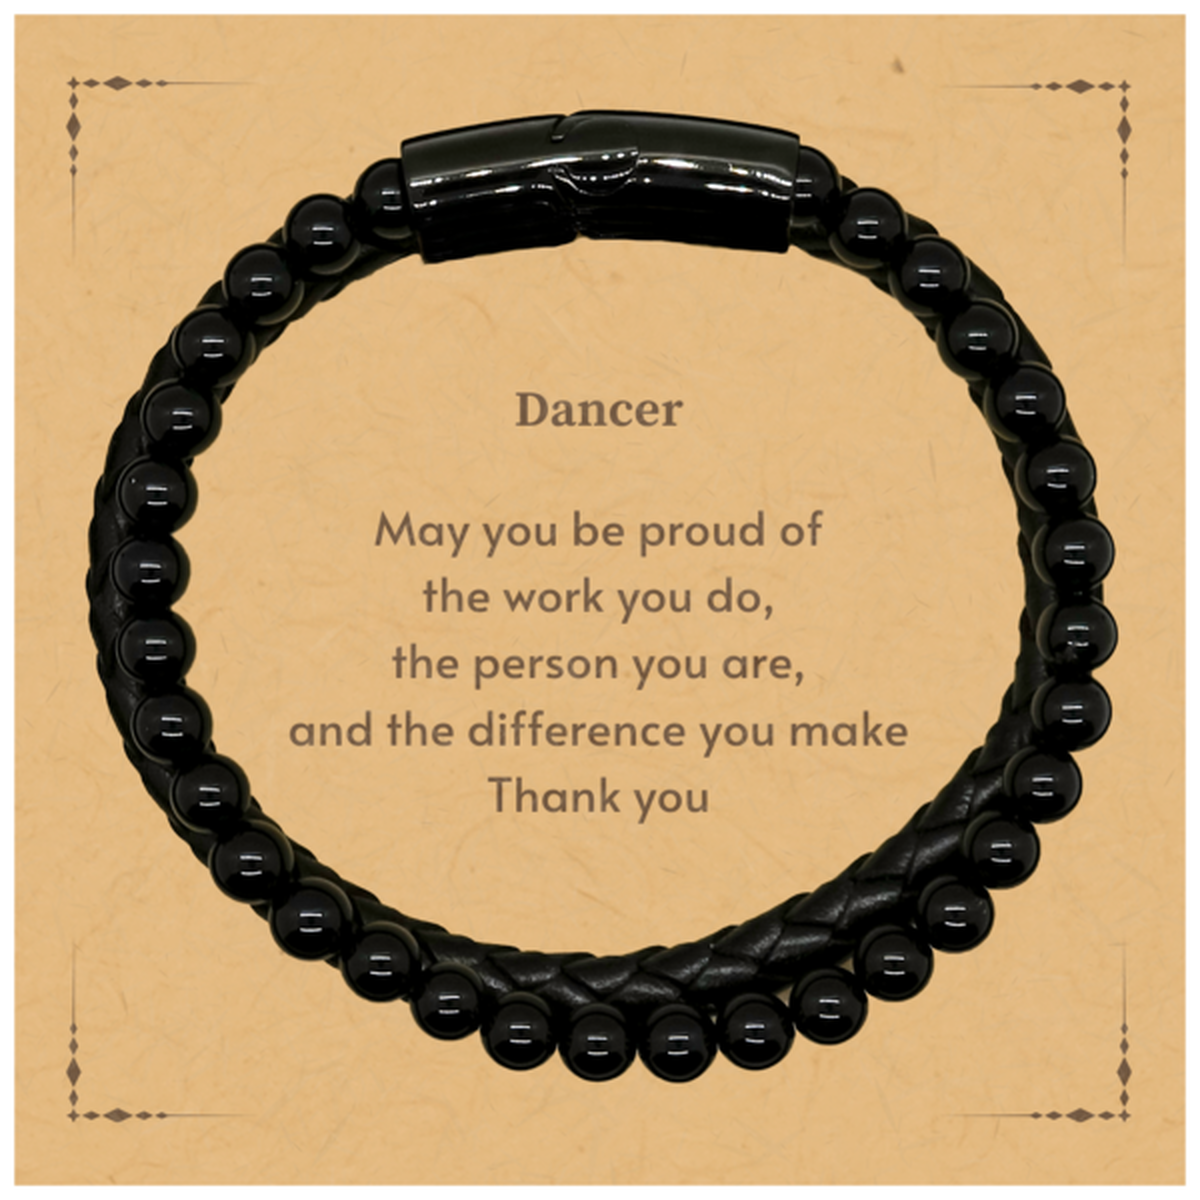 Heartwarming Stone Leather Bracelets Retirement Coworkers Gifts for Dancer, Dancer May You be proud of the work you do, the person you are Gifts for Boss Men Women Friends